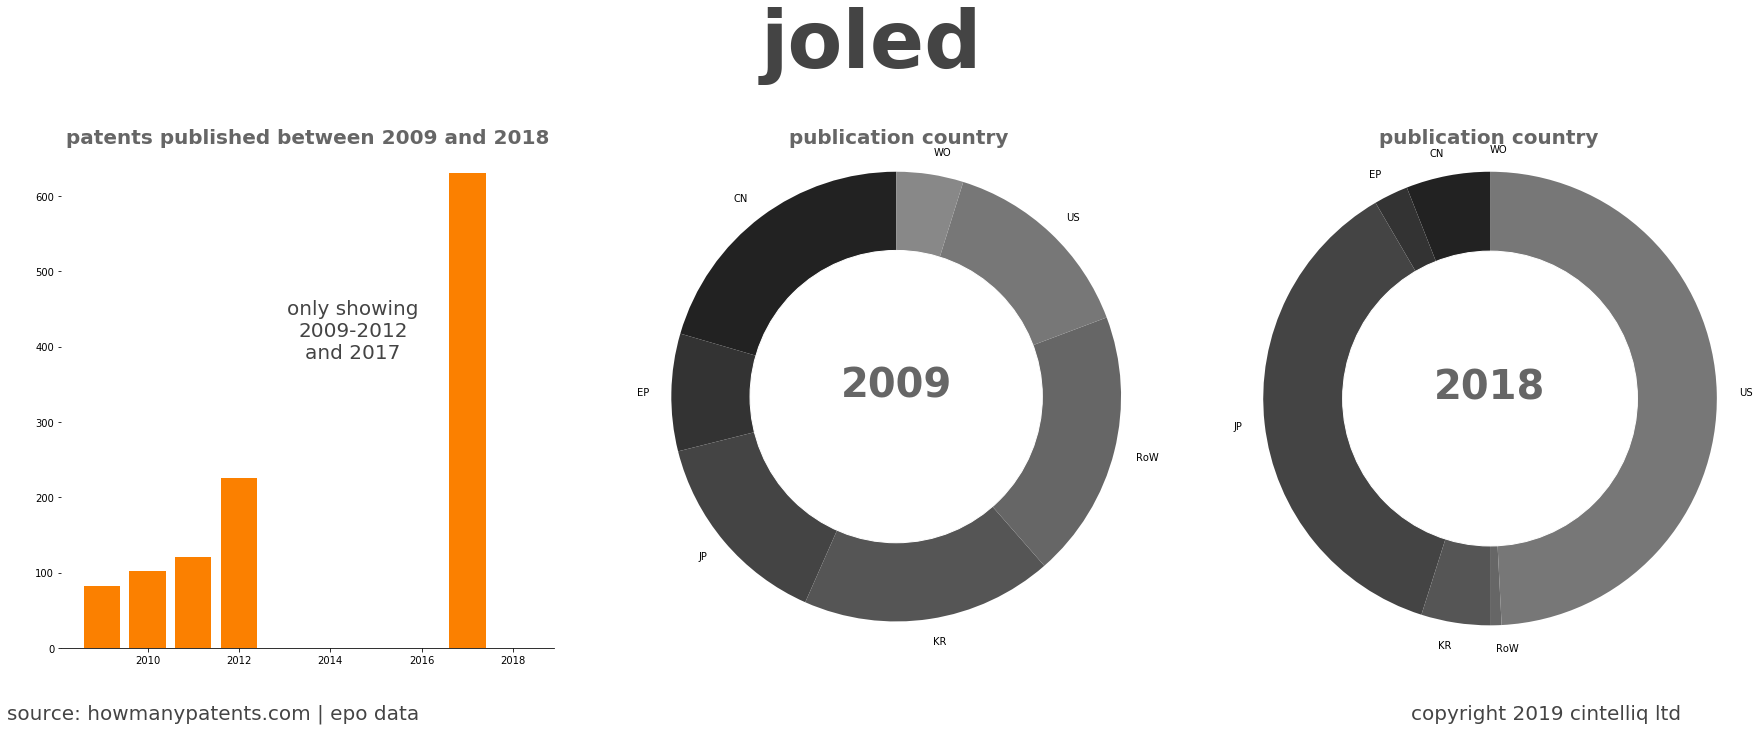 summary of patents for Joled